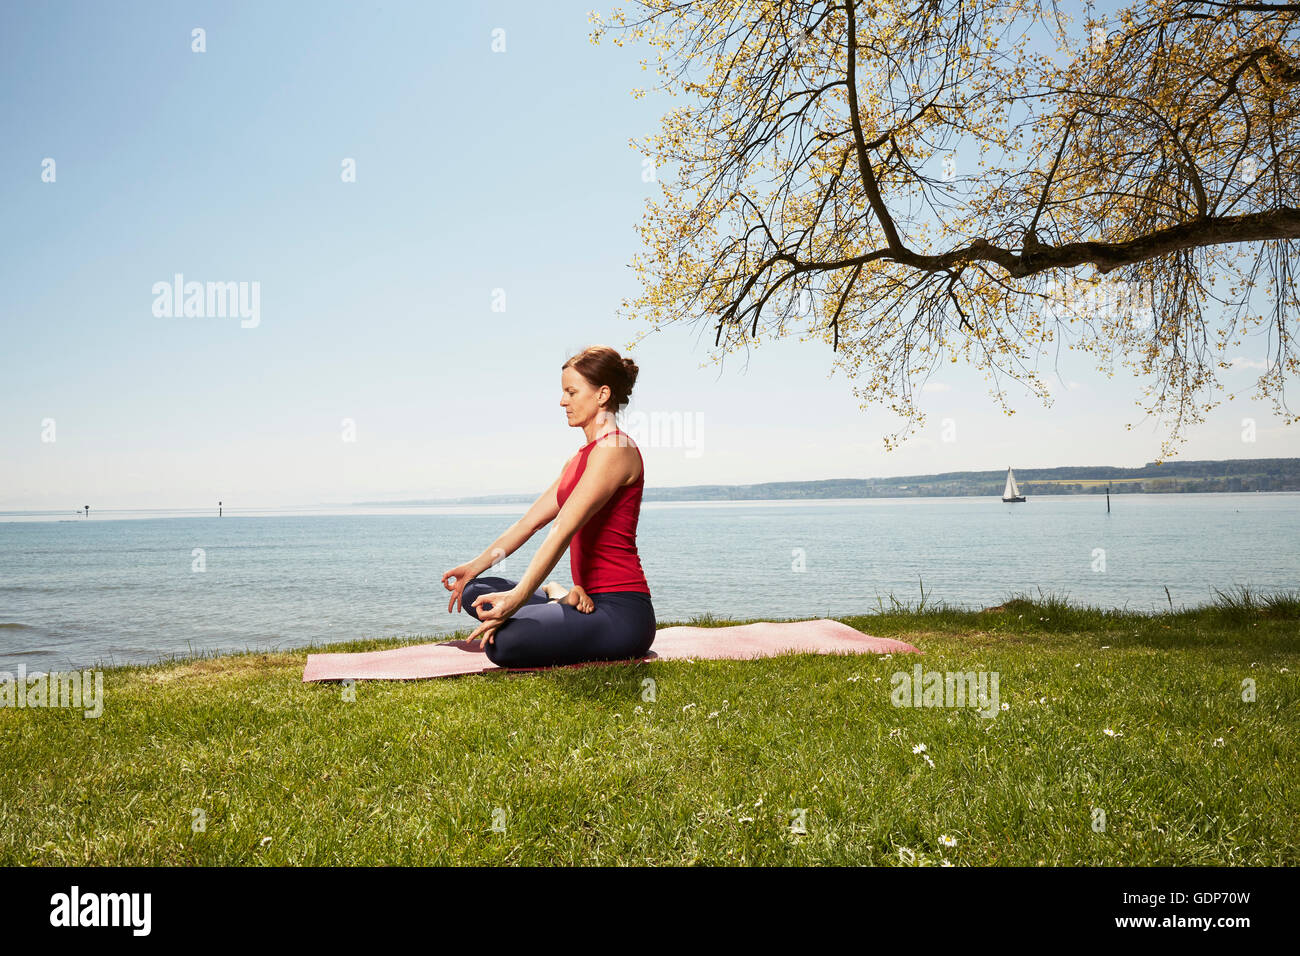 Side view of woman meditating Stock Photo